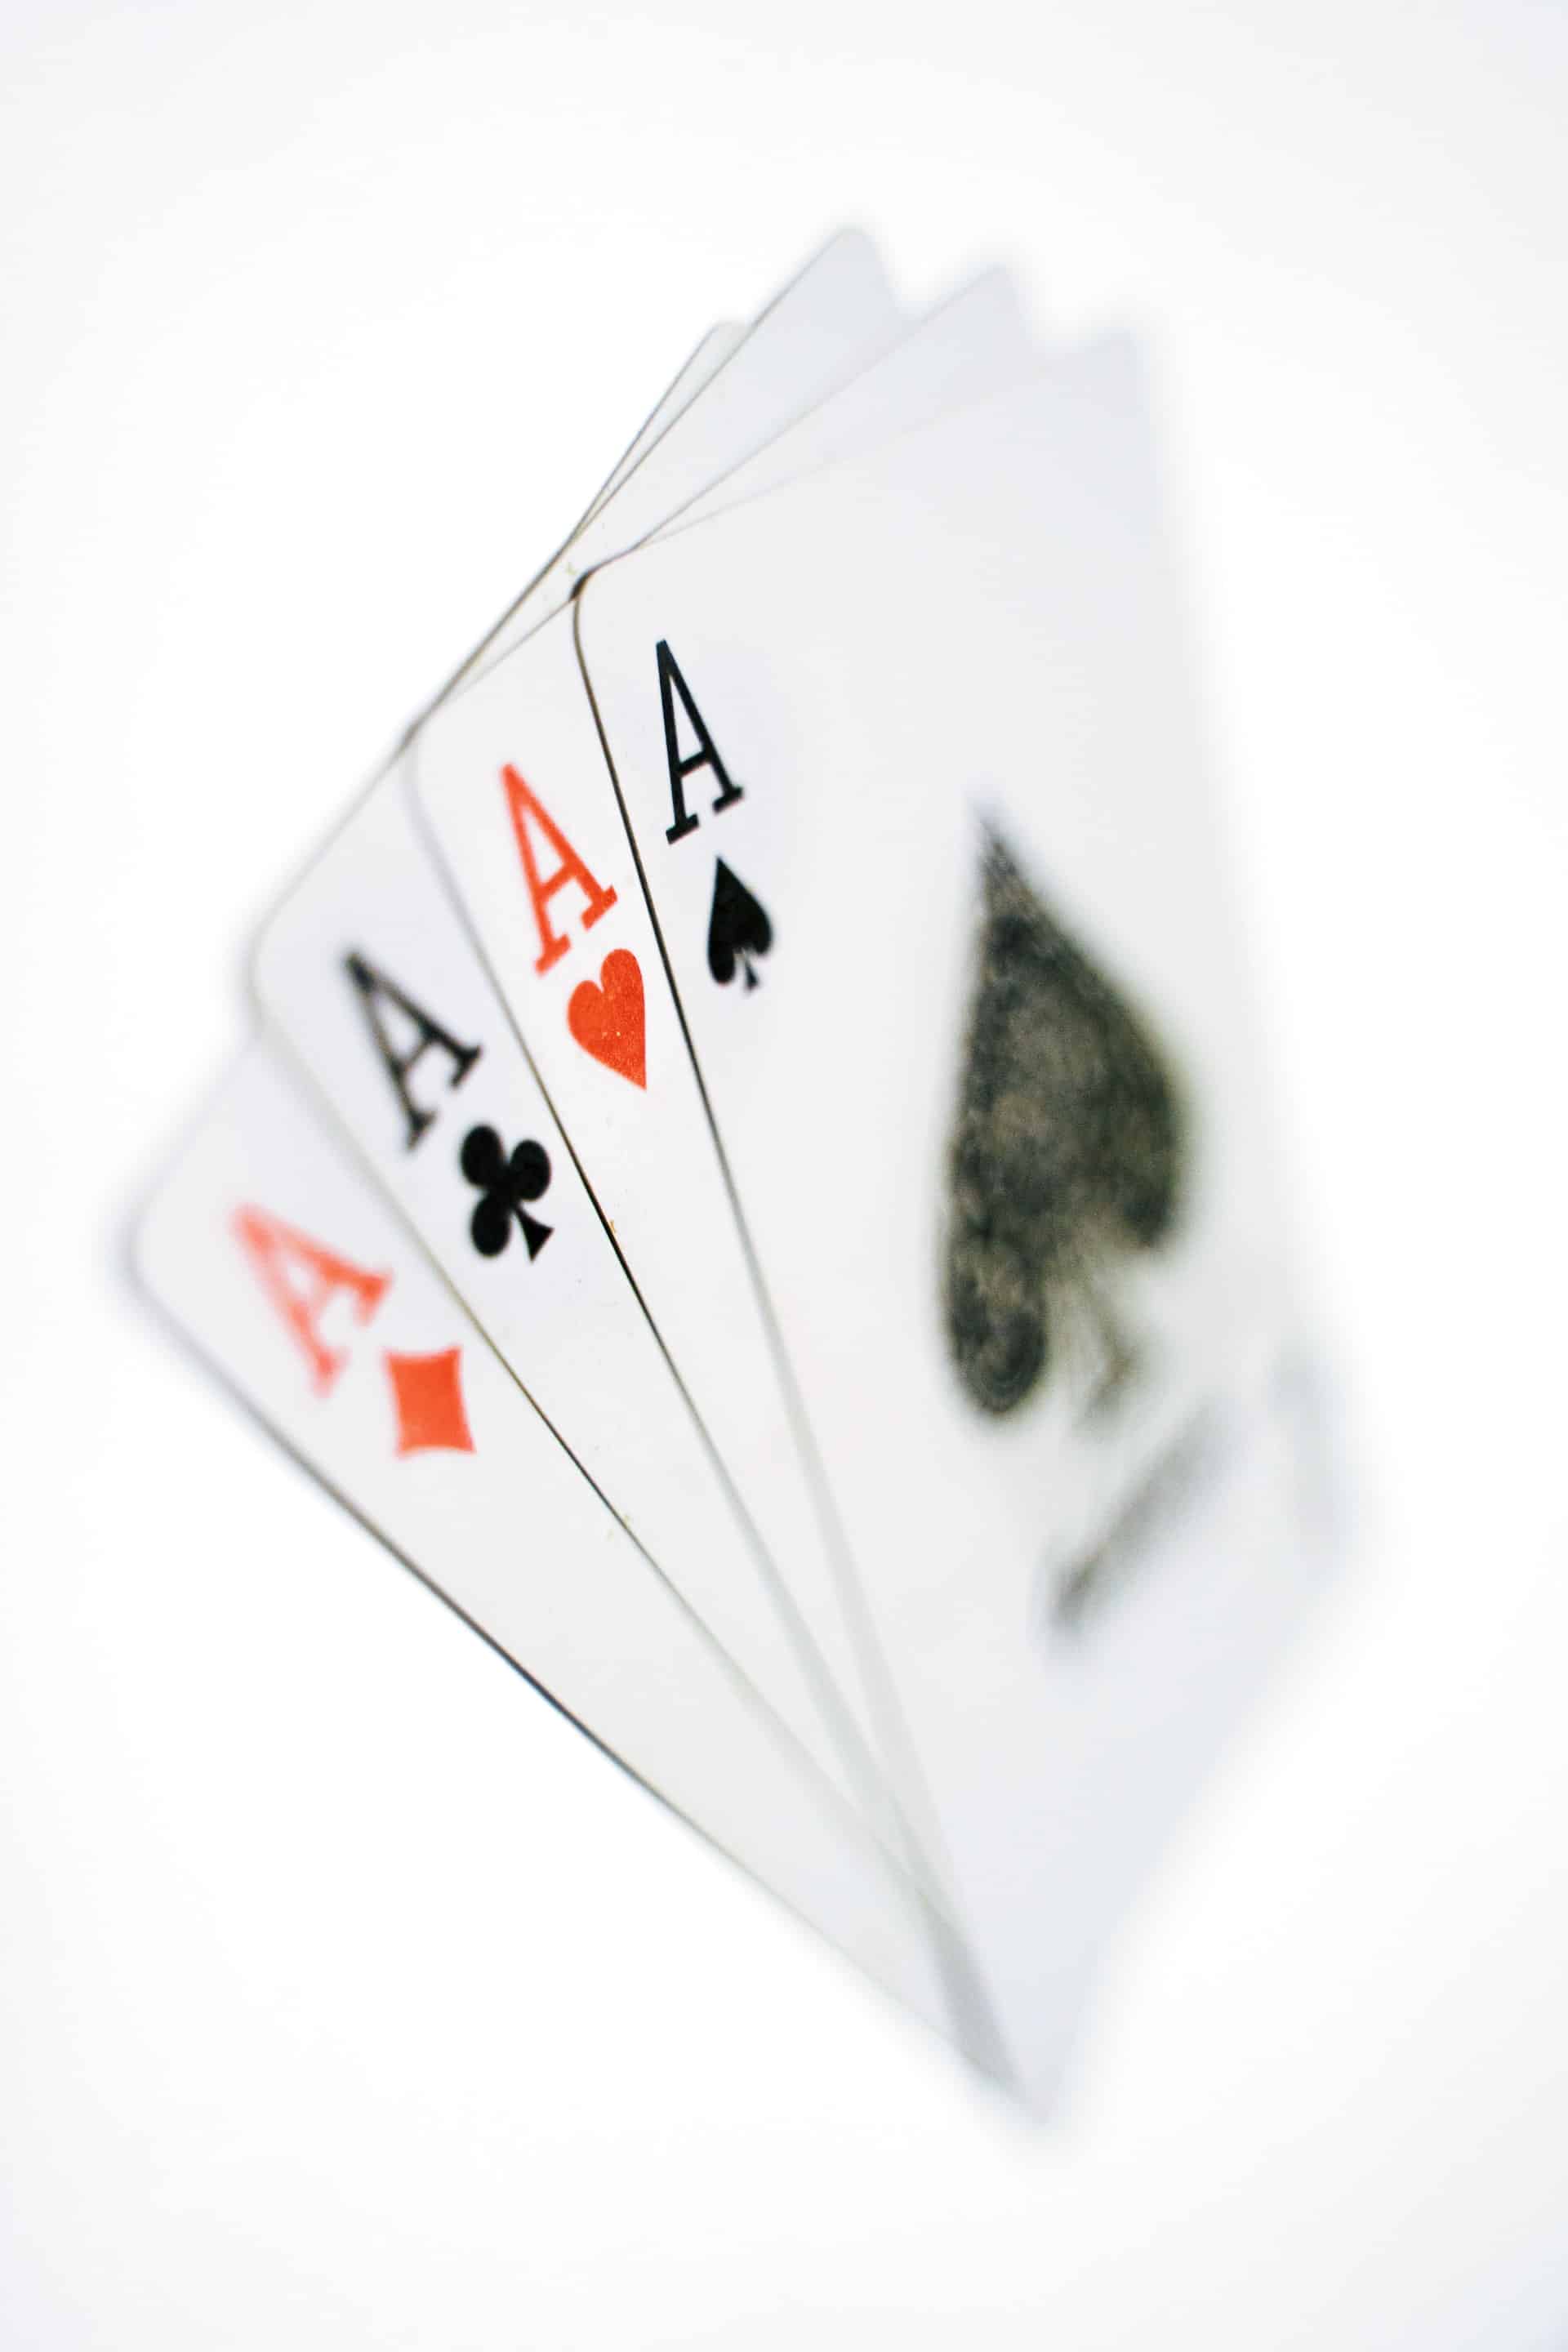 Texas Hold'em Poker Mistakes Article Image